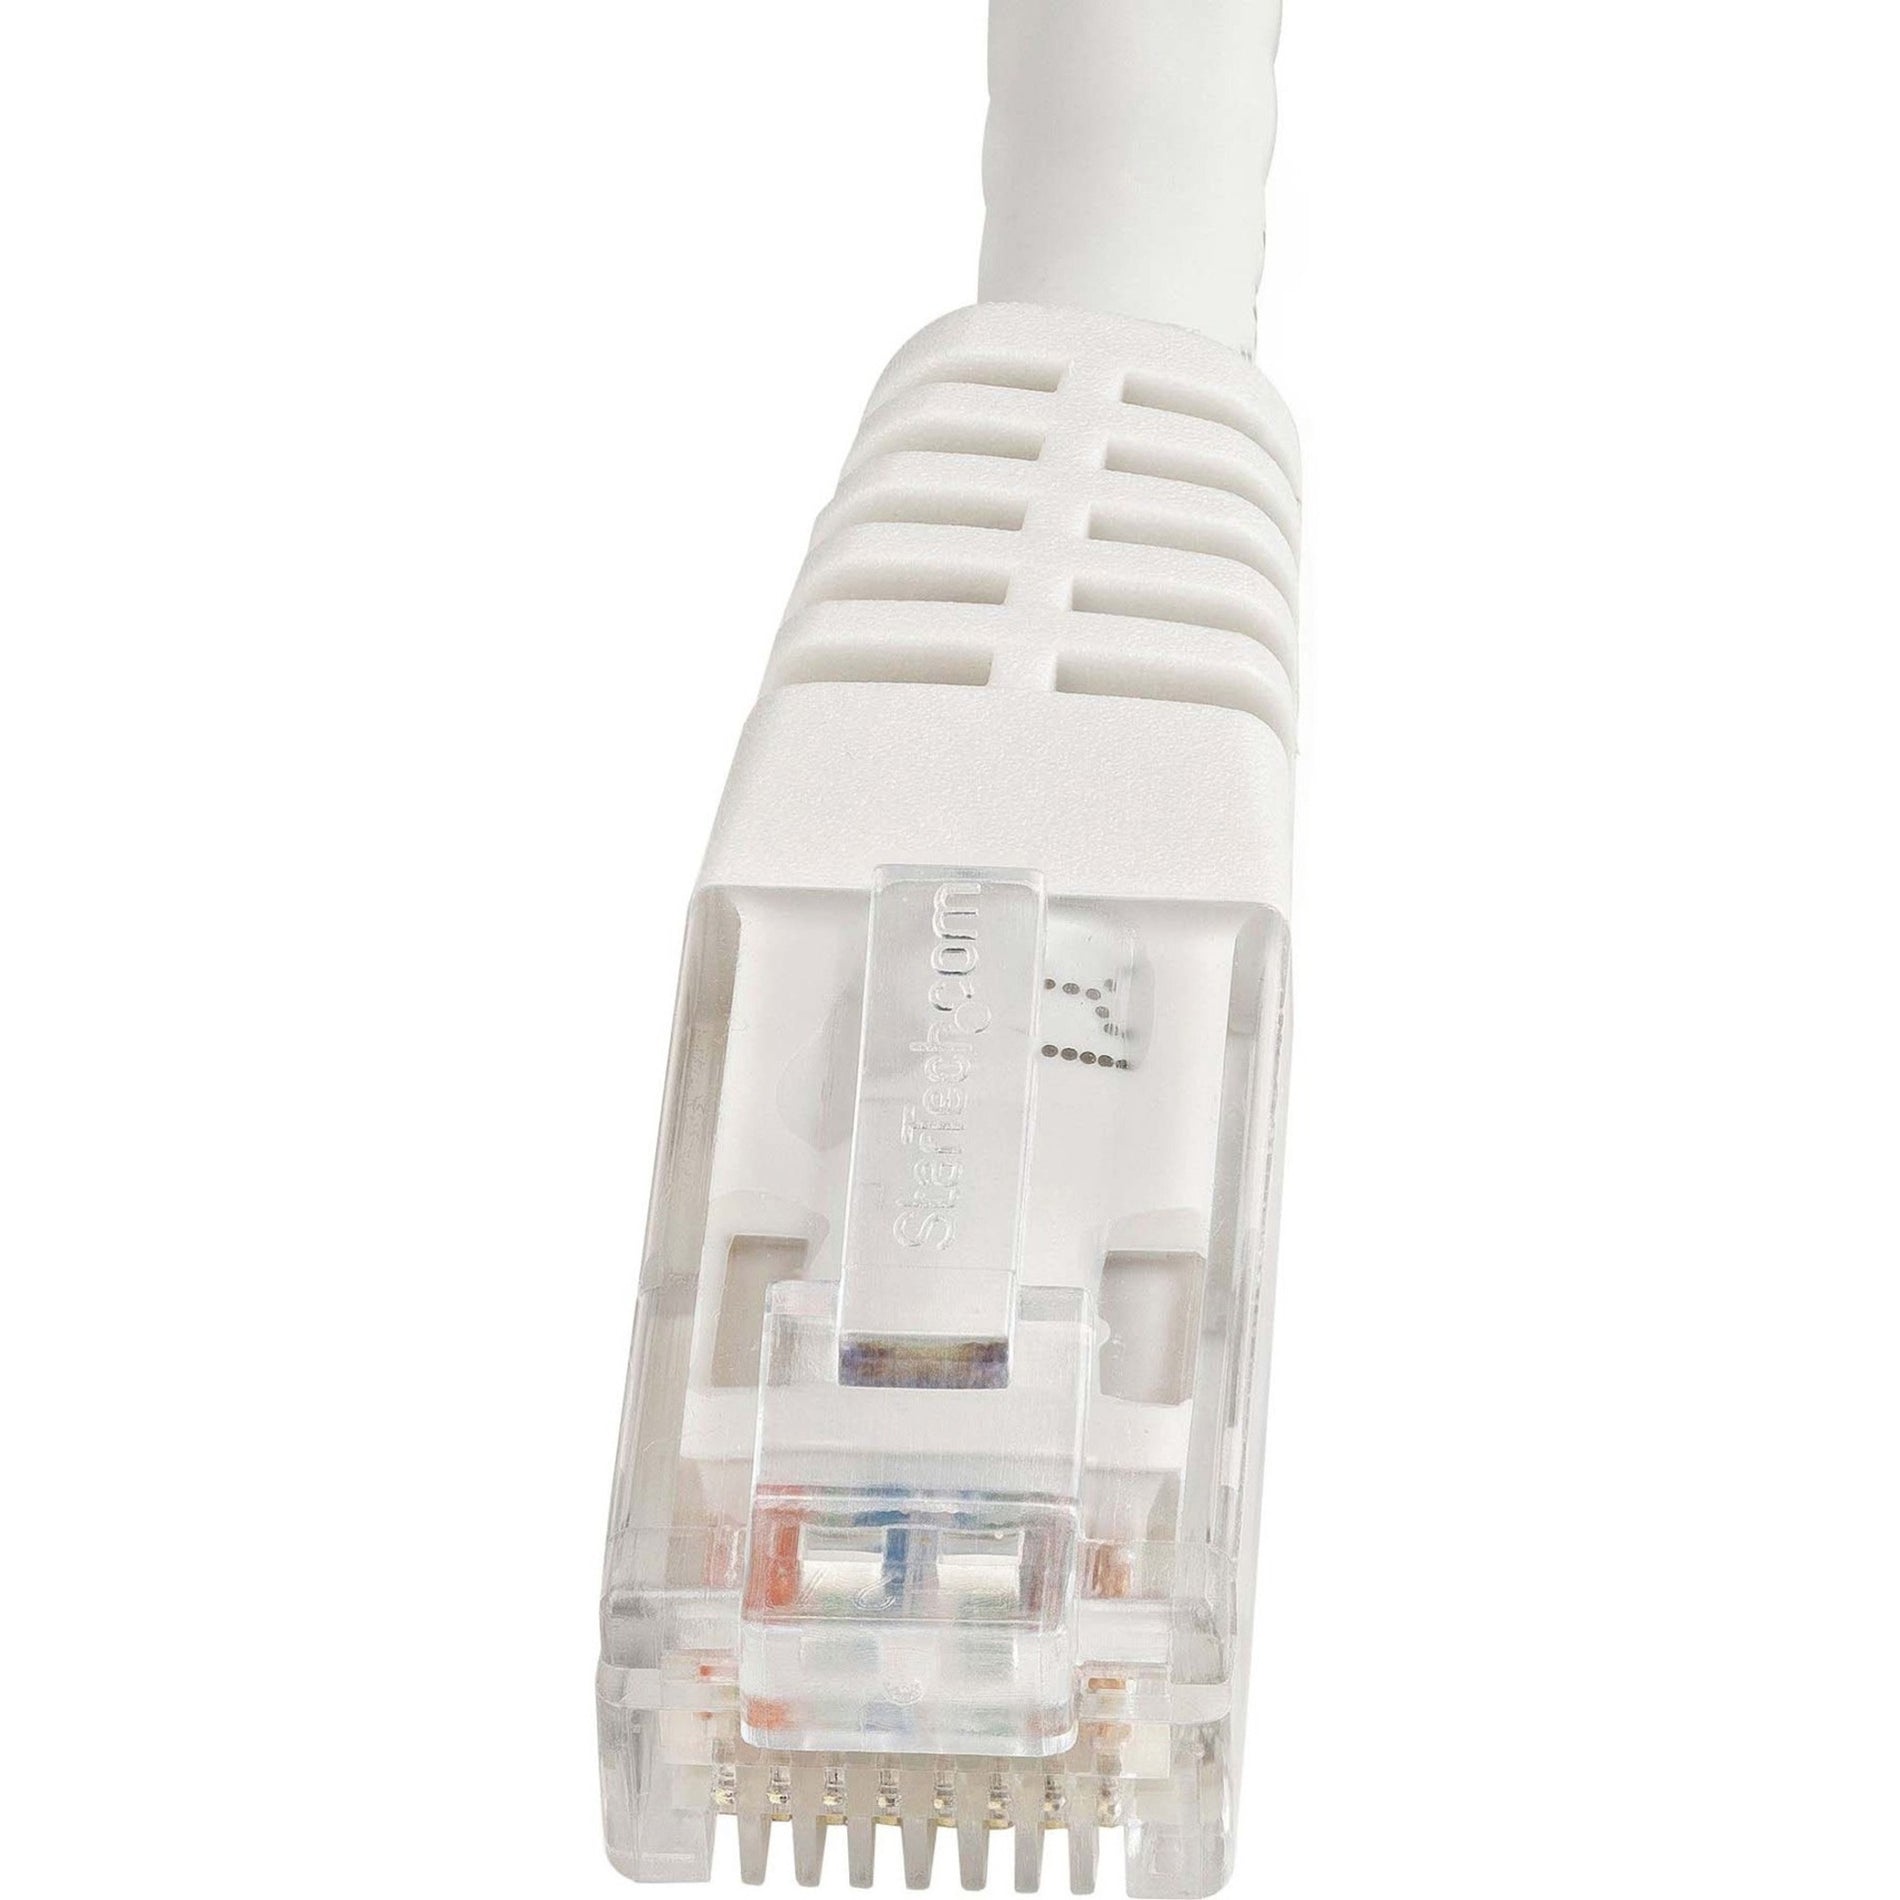 StarTech.com C6PATCH1WH 1ft White Cat6 UTP Patch Cable ETL Verified, 10 Gbit/s Data Transfer Rate, Strain Relief